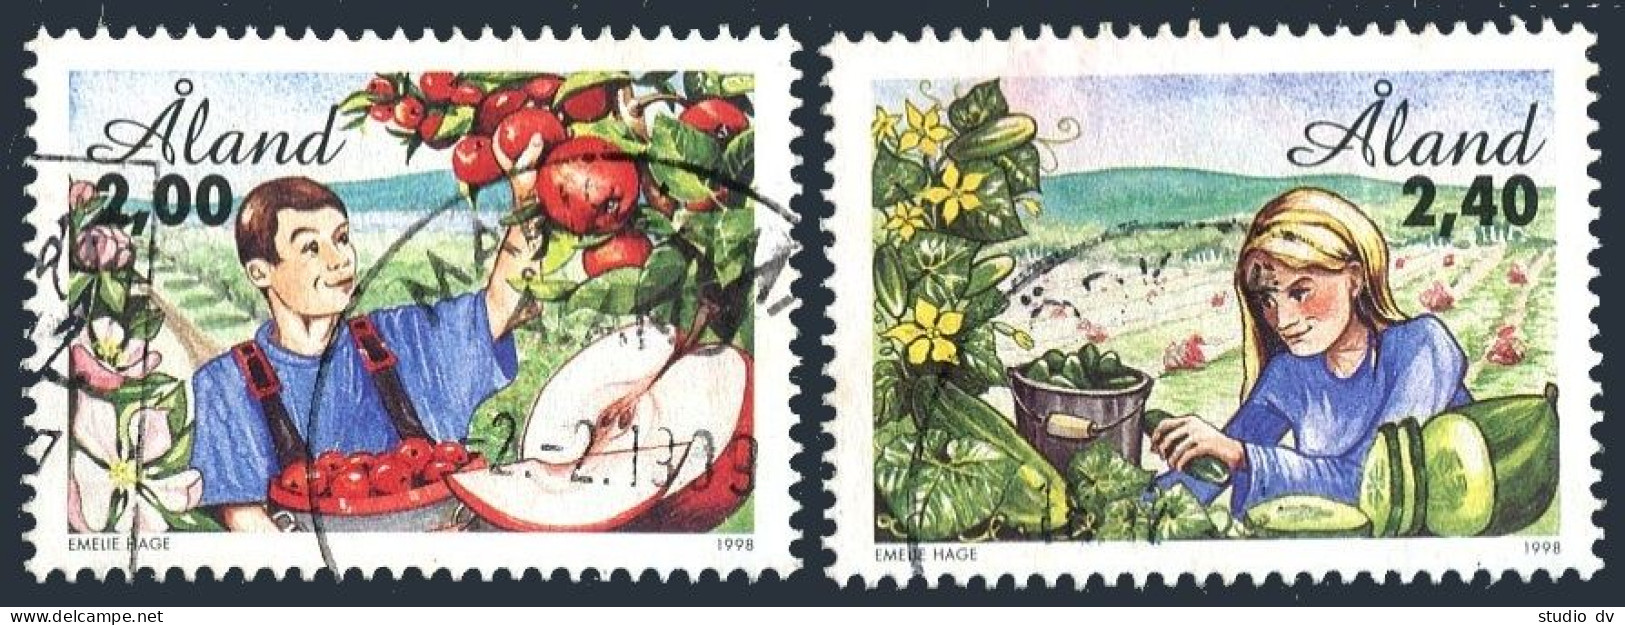 Finland-Aland 138-139, Used. Mi 134-135. Horticulture 1998. Apples, Cucumbers. - Aland